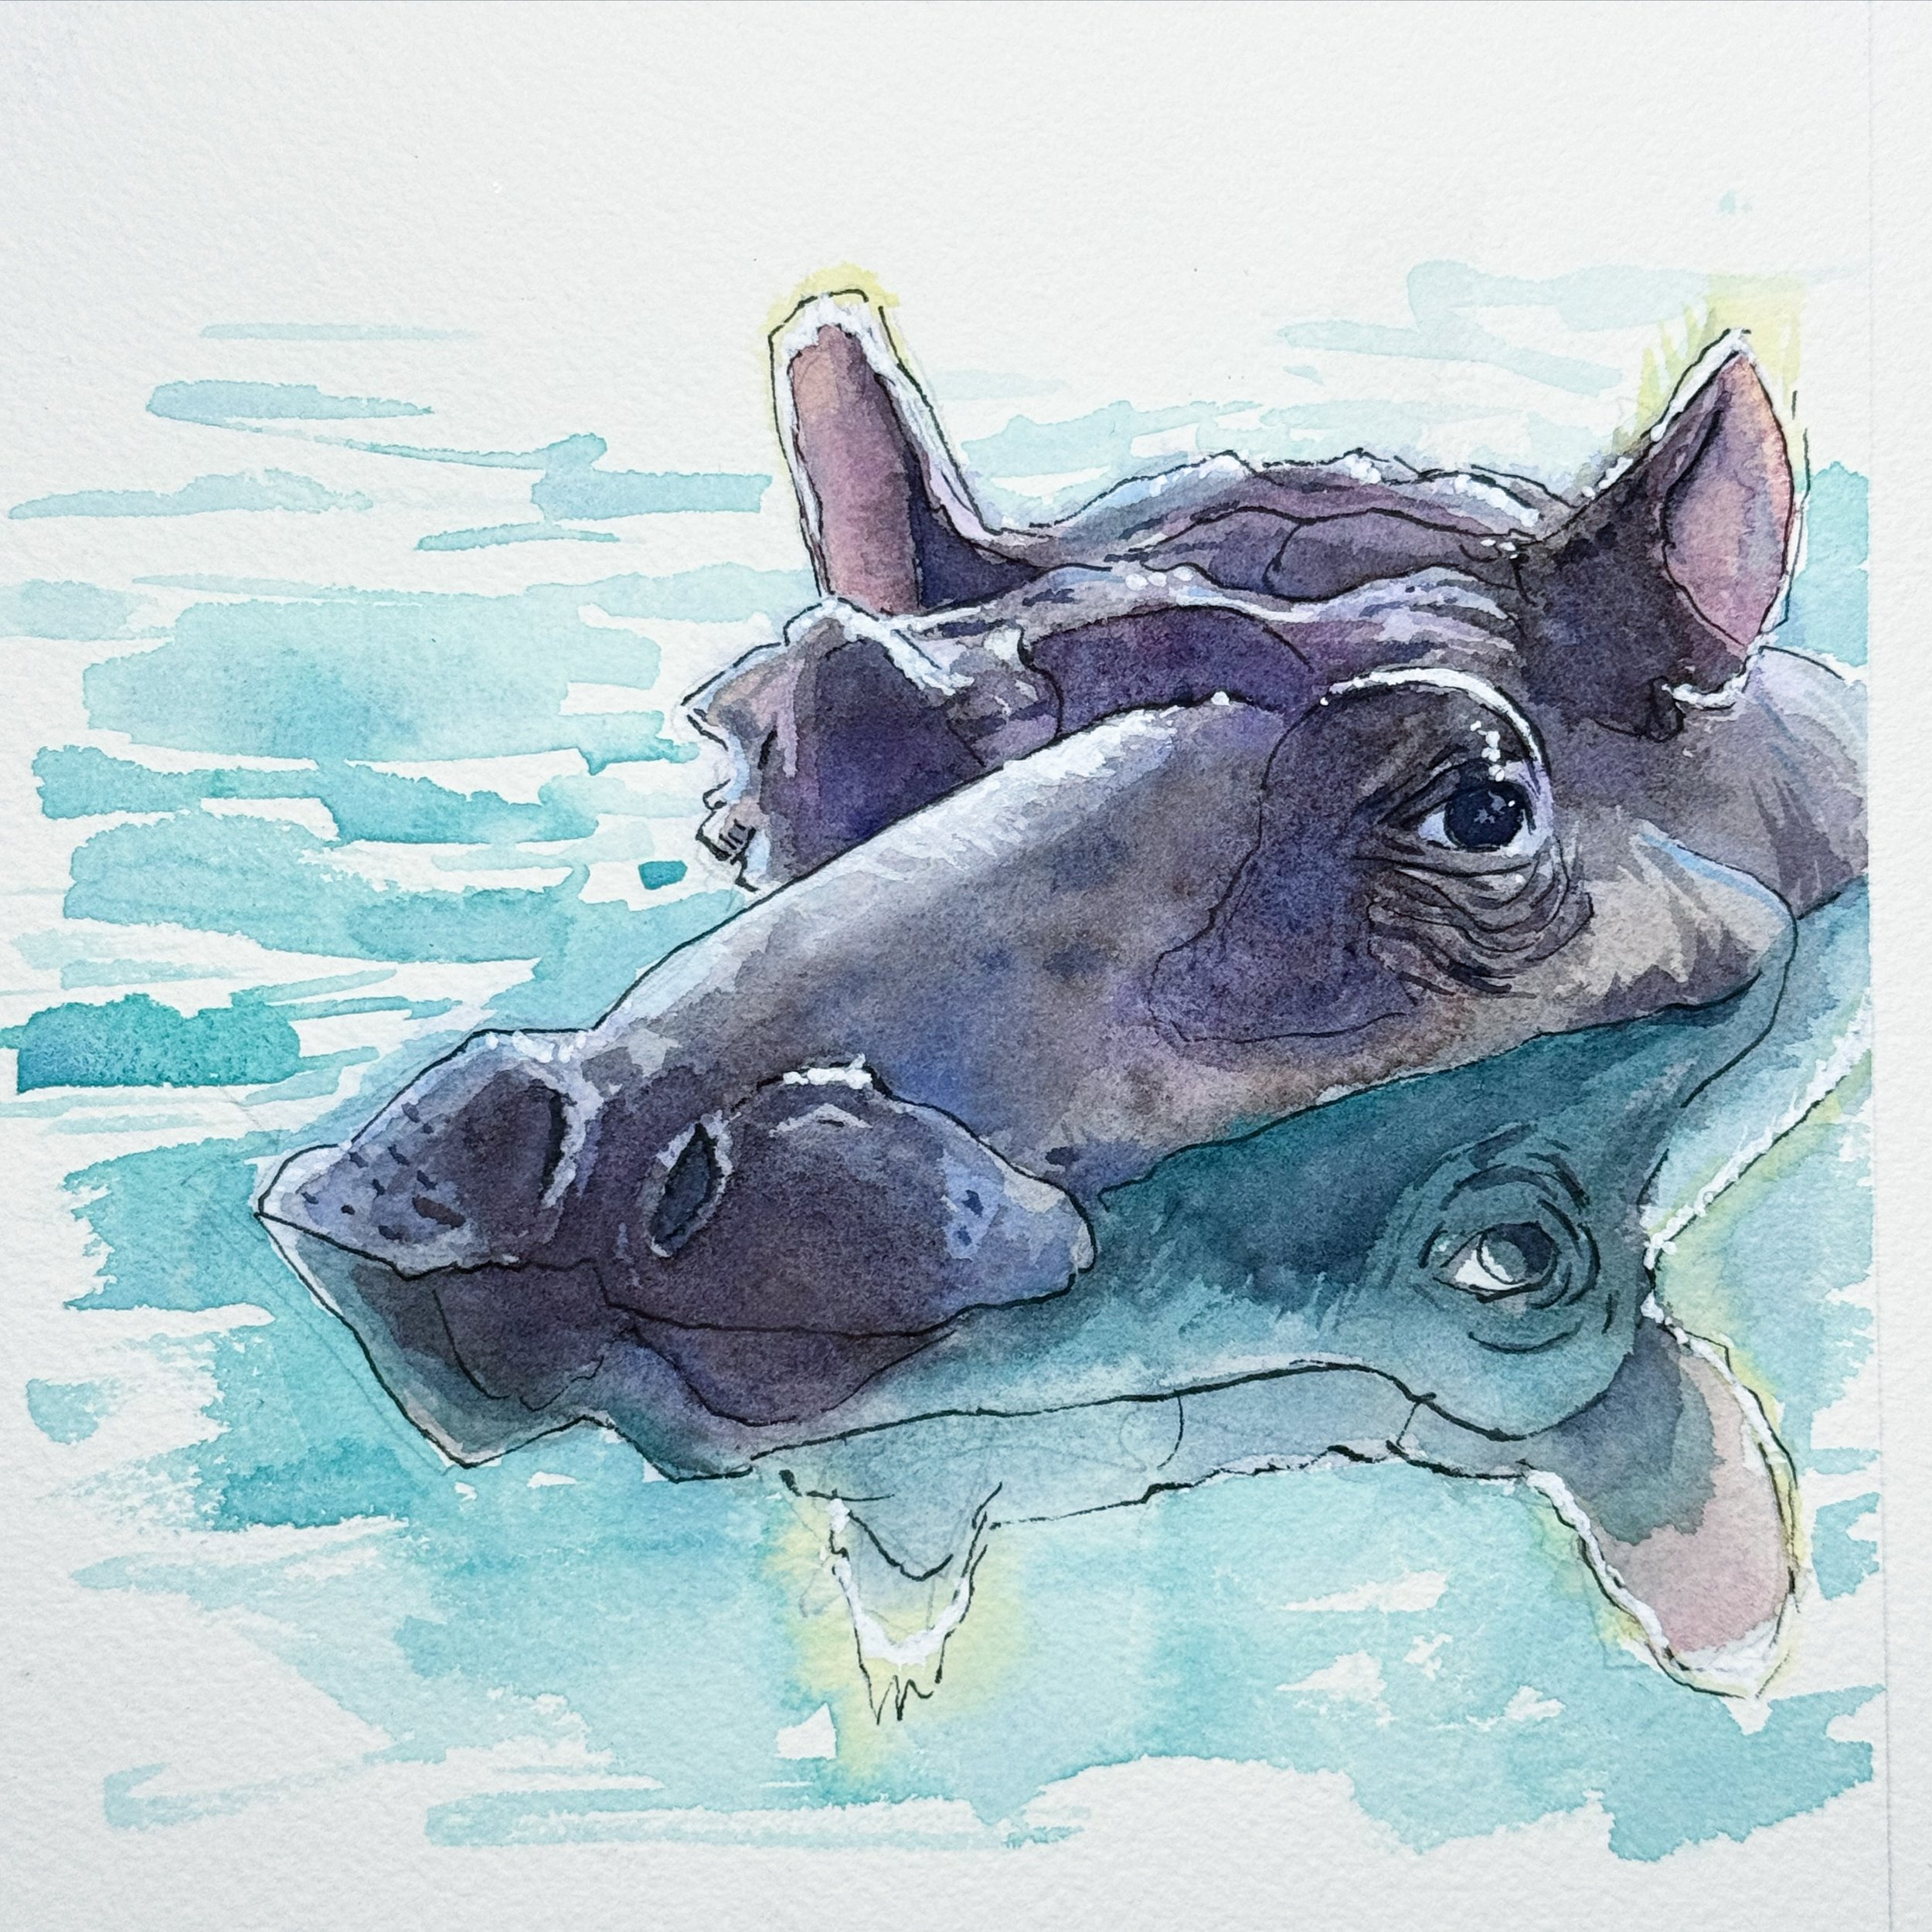 H is for Hippo. 
Did you miss the Live feed of me painting this? Don&rsquo;t worry, I posted it. It&rsquo;s the most recent video in my feed. I talked with @vanessakjupe (founder of @leva.app, former coworker at @directv, and relentless entrepreneur)